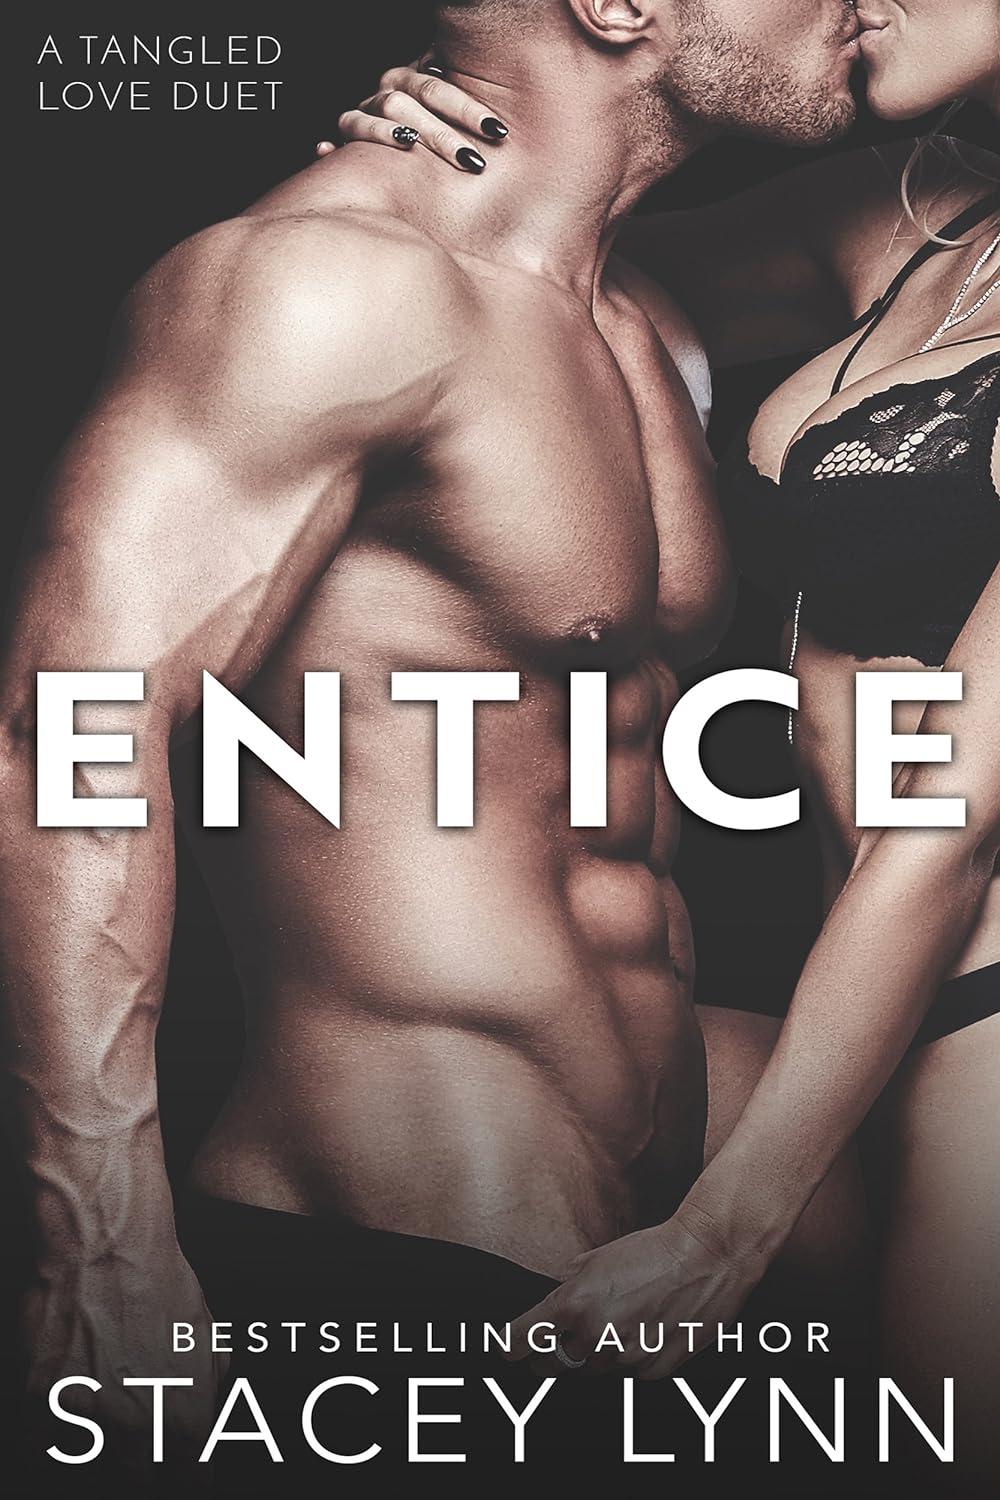 Entice Tangled Love Series by Bestselling Author Stacey Lynn